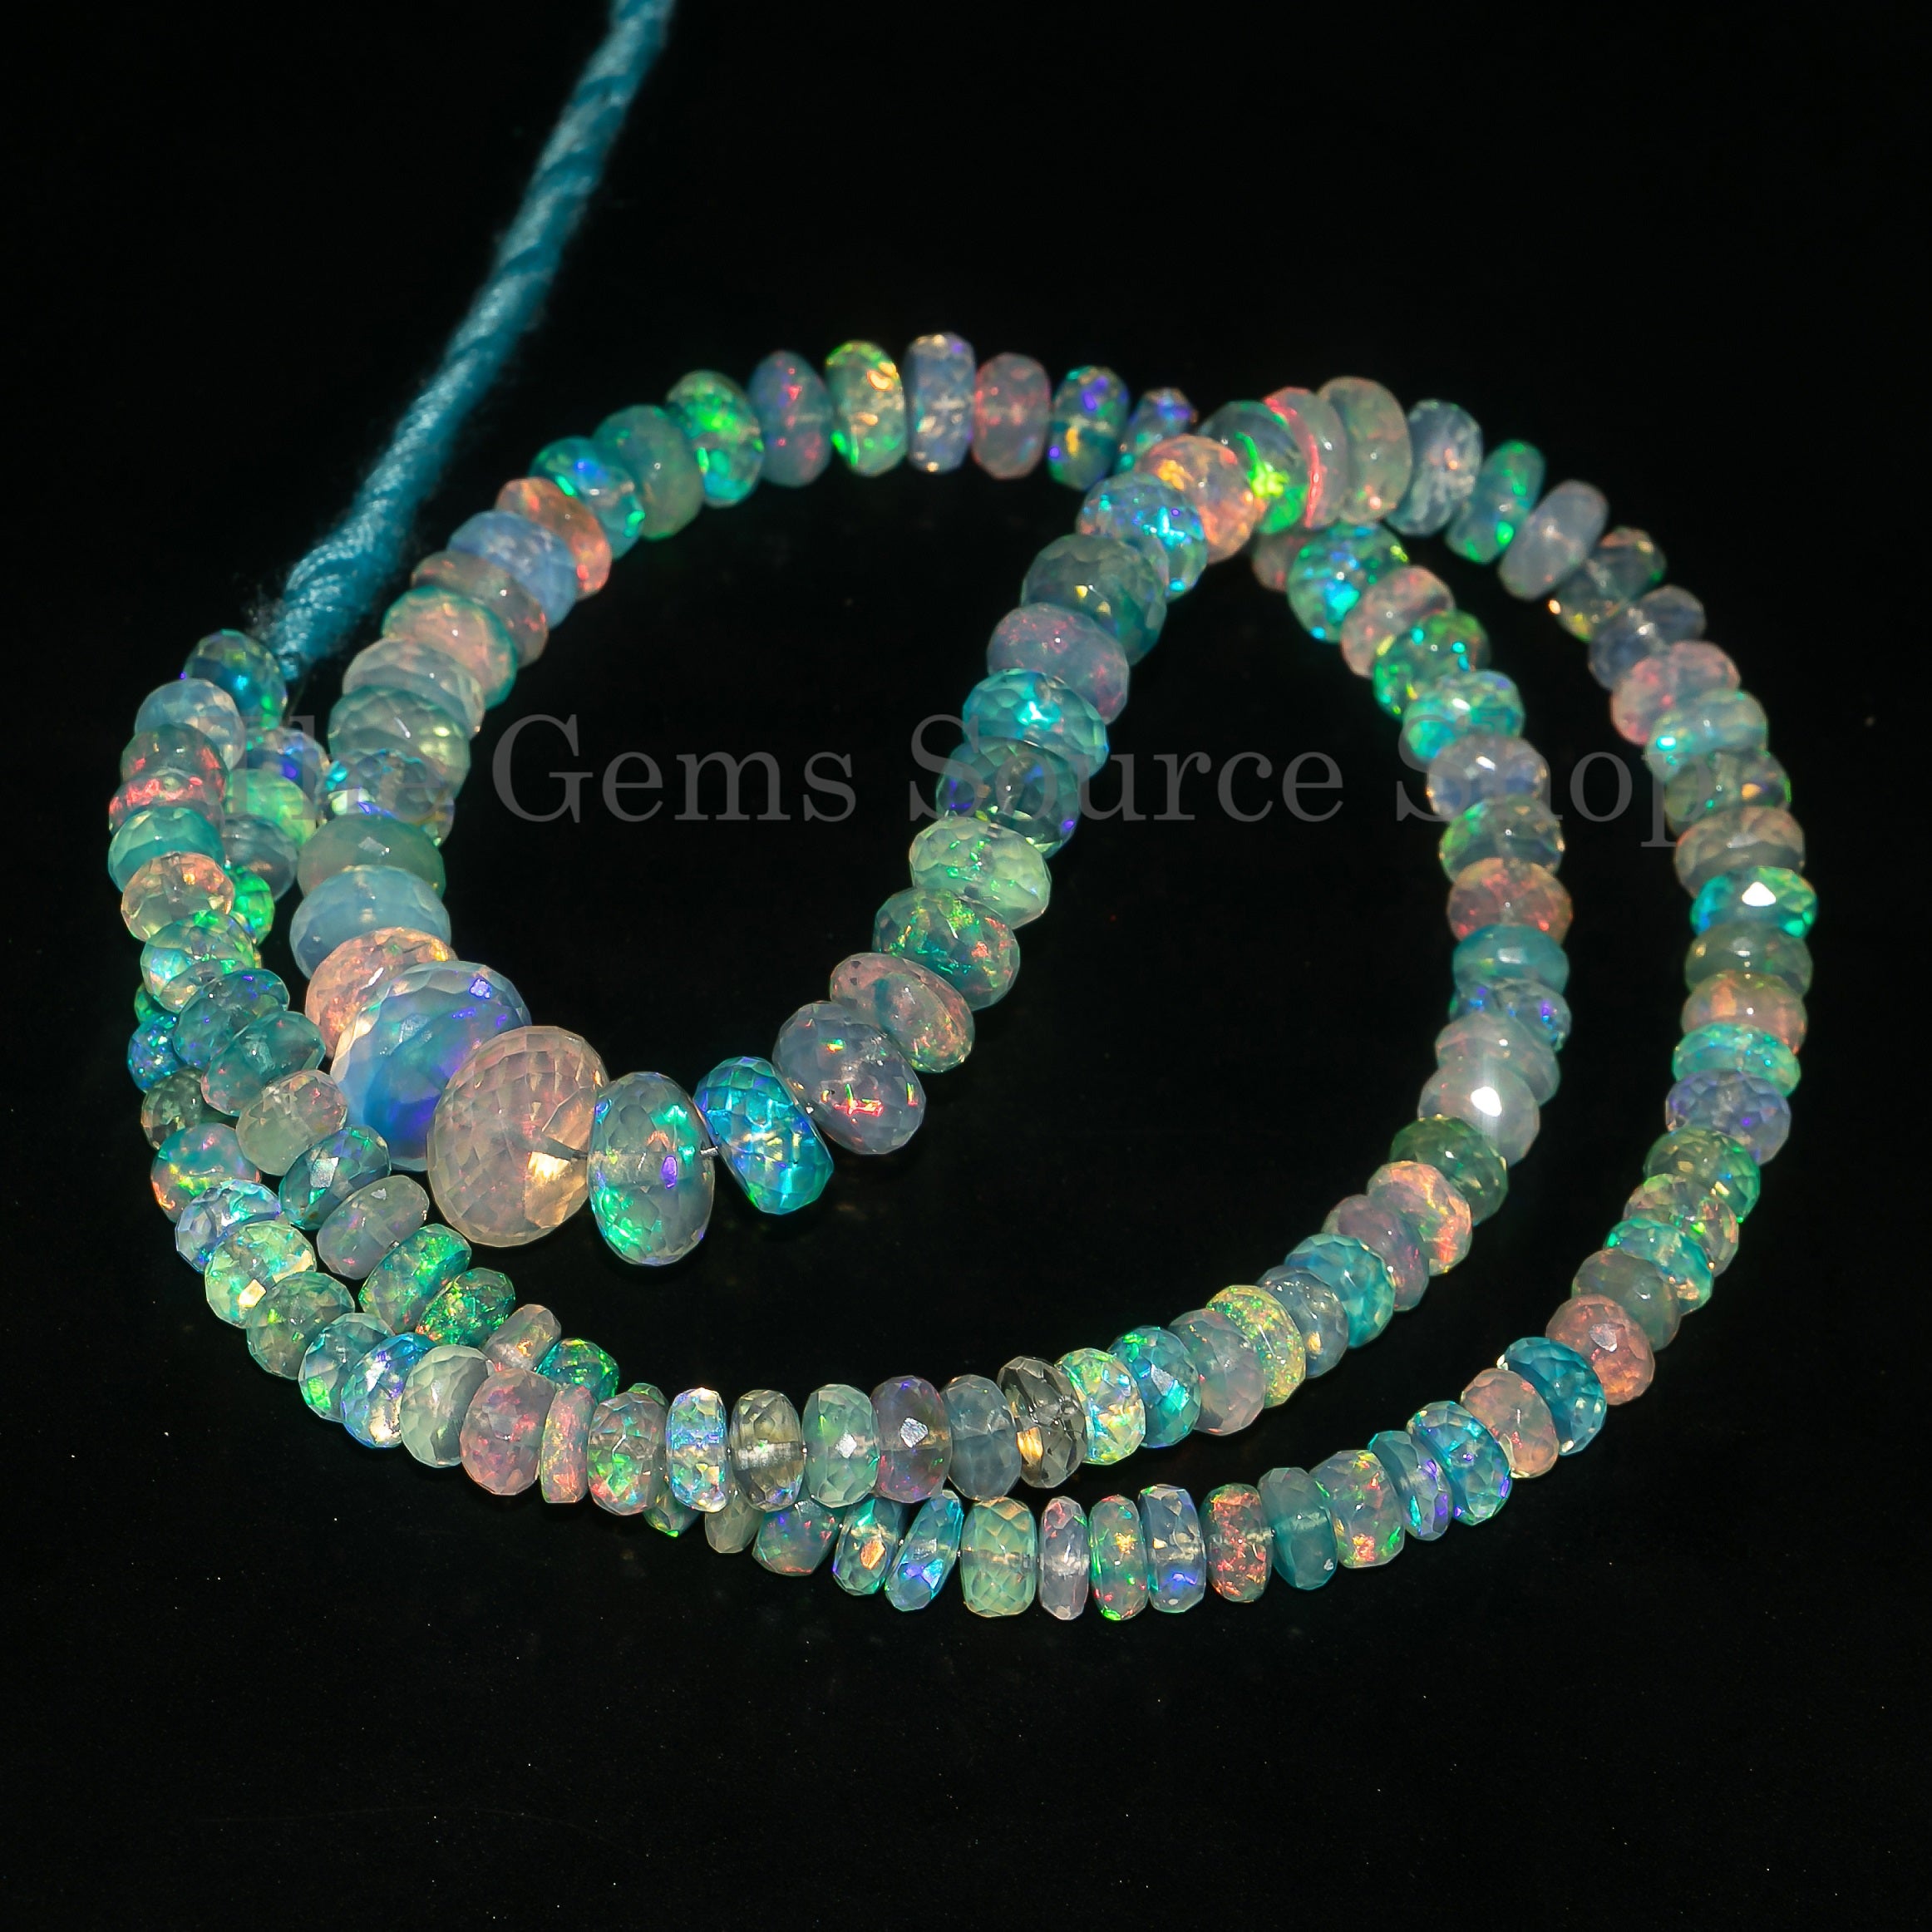 5-10 mm Light Blue Ethiopian Opal Faceted Rondelle Beads, Loose Opal Beads TGS-4544